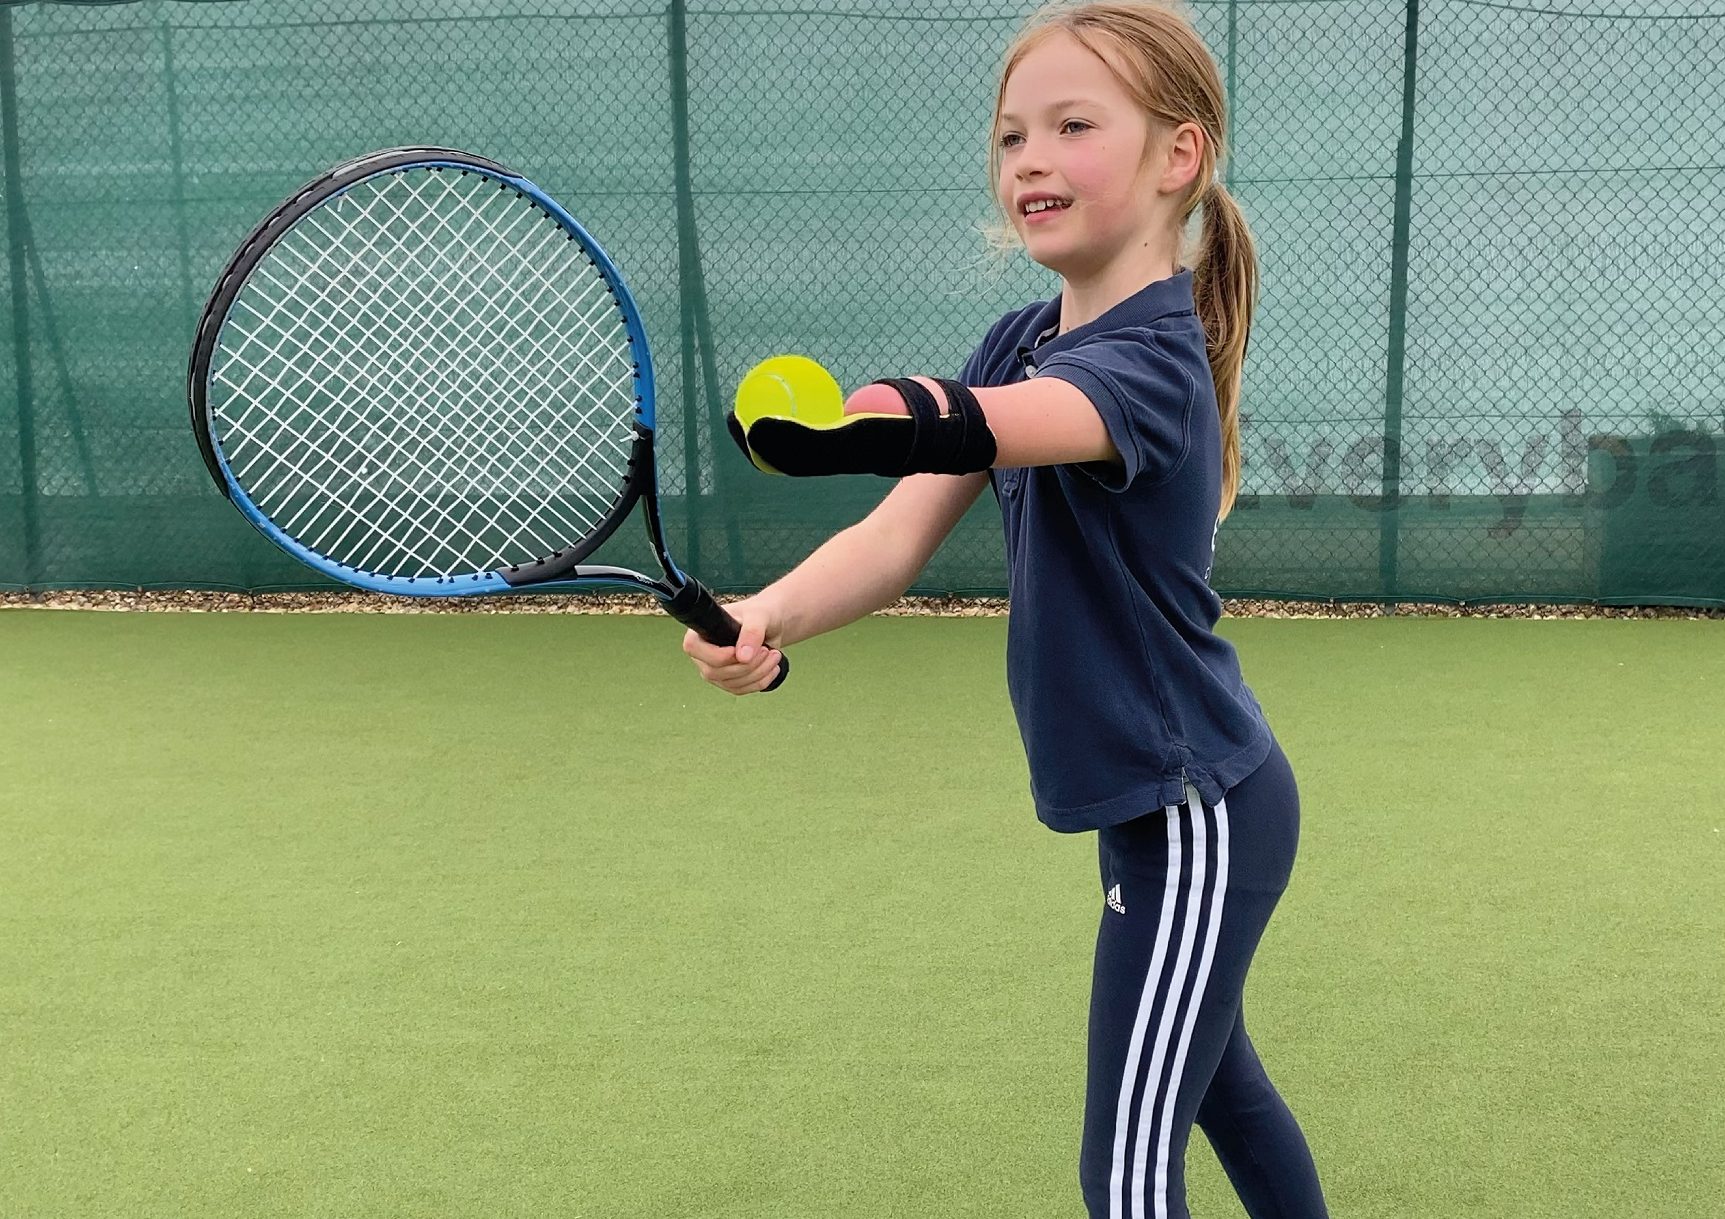 9-Year-Old Tennis Star Triumphs With New Prosthetic Arm